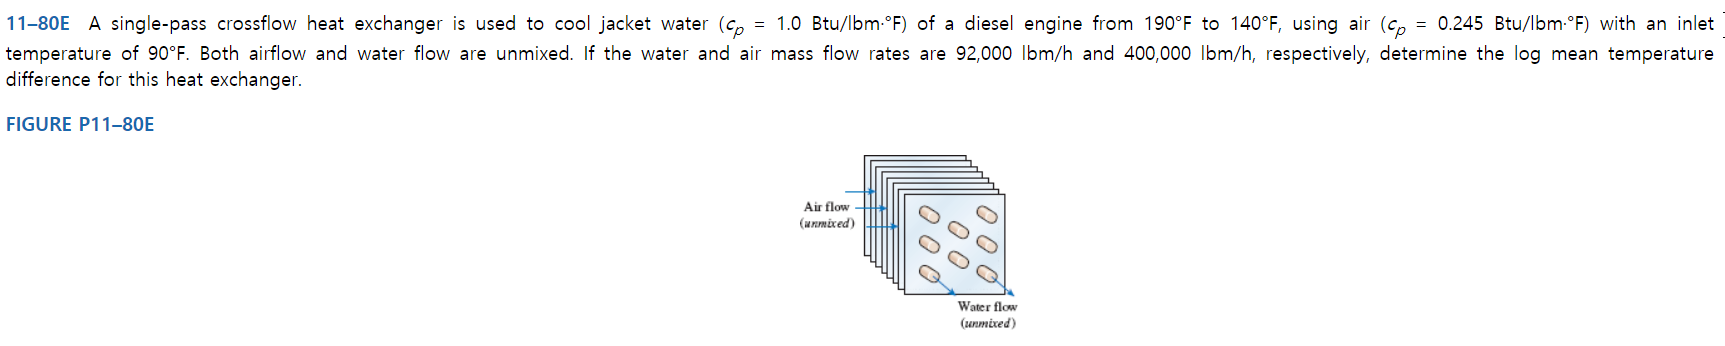 = 1.0 Btu/lbm-°F) of a diesel engine from 190°F to 140°F, using air (c = 0.245 Btu/lbm F) with an inlet
11-80E A single-pass crossflow heat exchanger is used to cool jacket water (cp
temperature of 90°F. Both airflow and water flow are unmixed. If the water and air mass flow rates are 92,000 lbm/h and 400,000 lbm/h, respectively, determine the log mean temperature
difference for this heat exchanger.
FIGURE P11-80E
Air flow
(иктіхеd)
Water flow
(апmixed)
